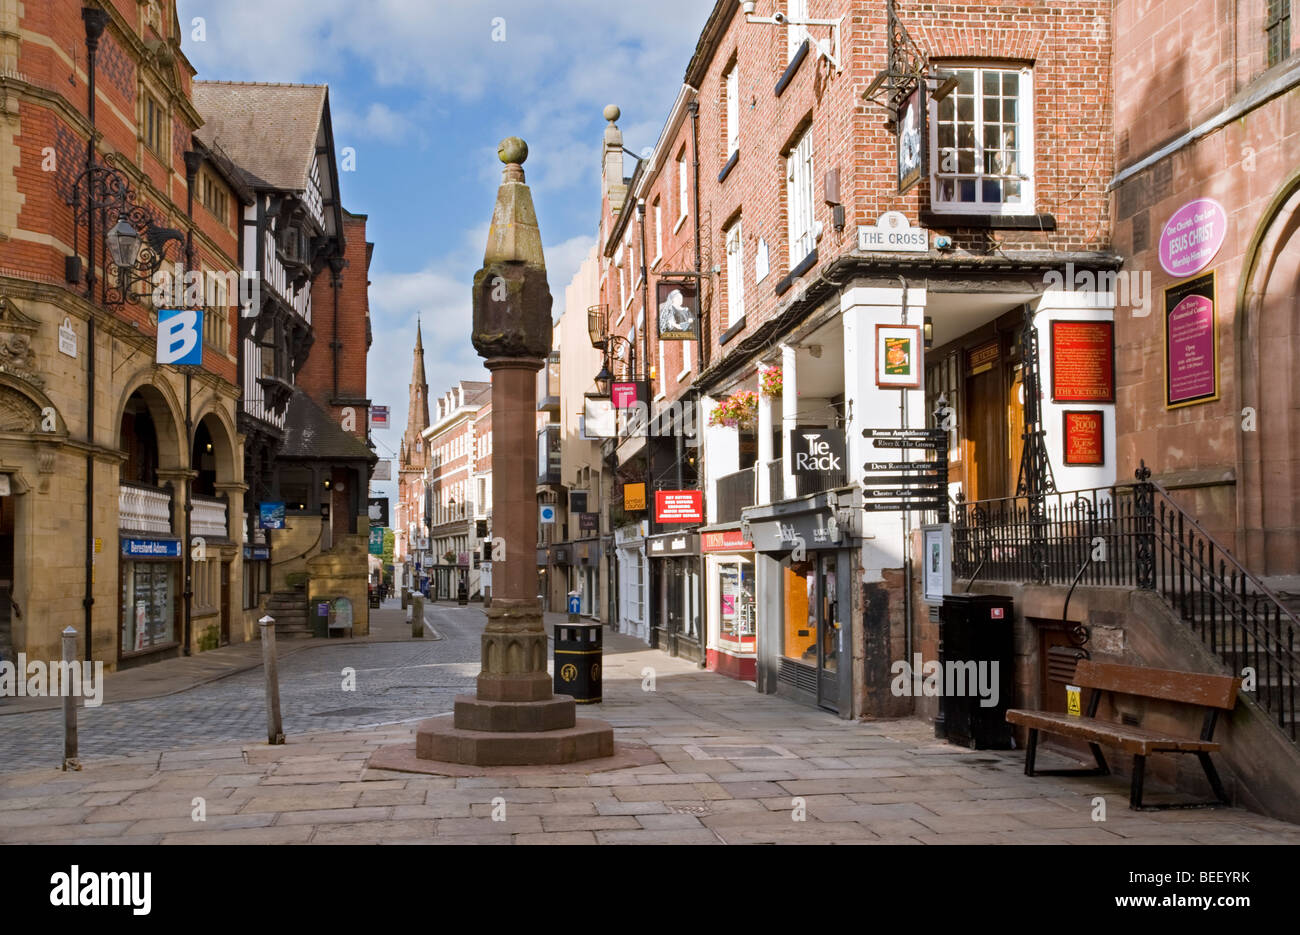 The Ancient Cross and The Rows Shopping Area on Bridge Street, Chester, Cheshire, England, UK Stock Photo